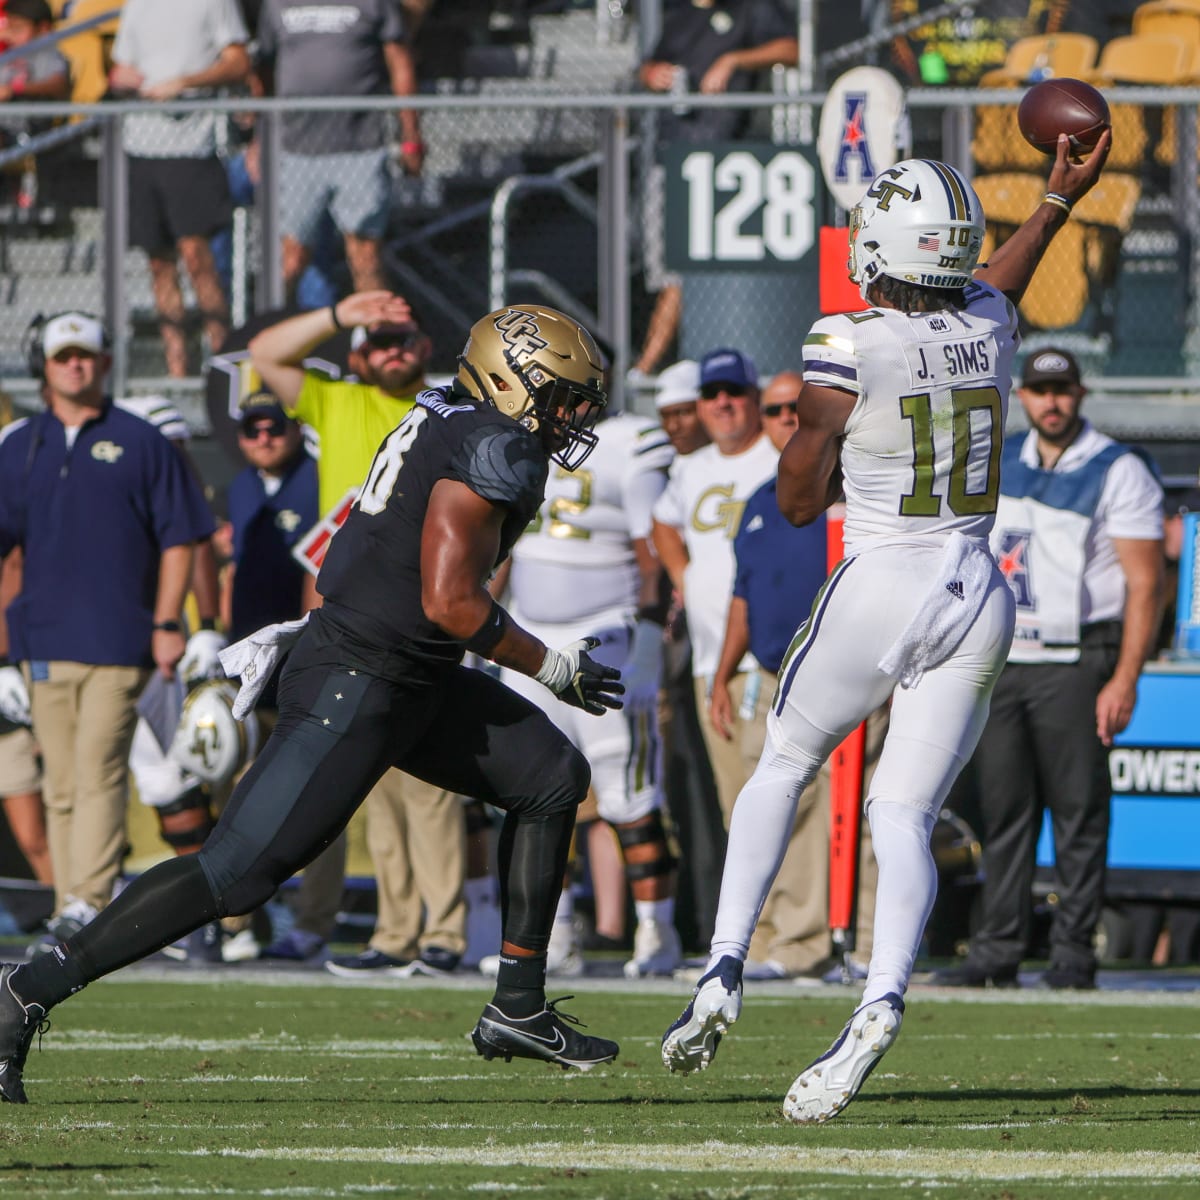 si.com - Jackson Caudell - Three Biggest Takeaways From Georgia Tech's loss to UCF